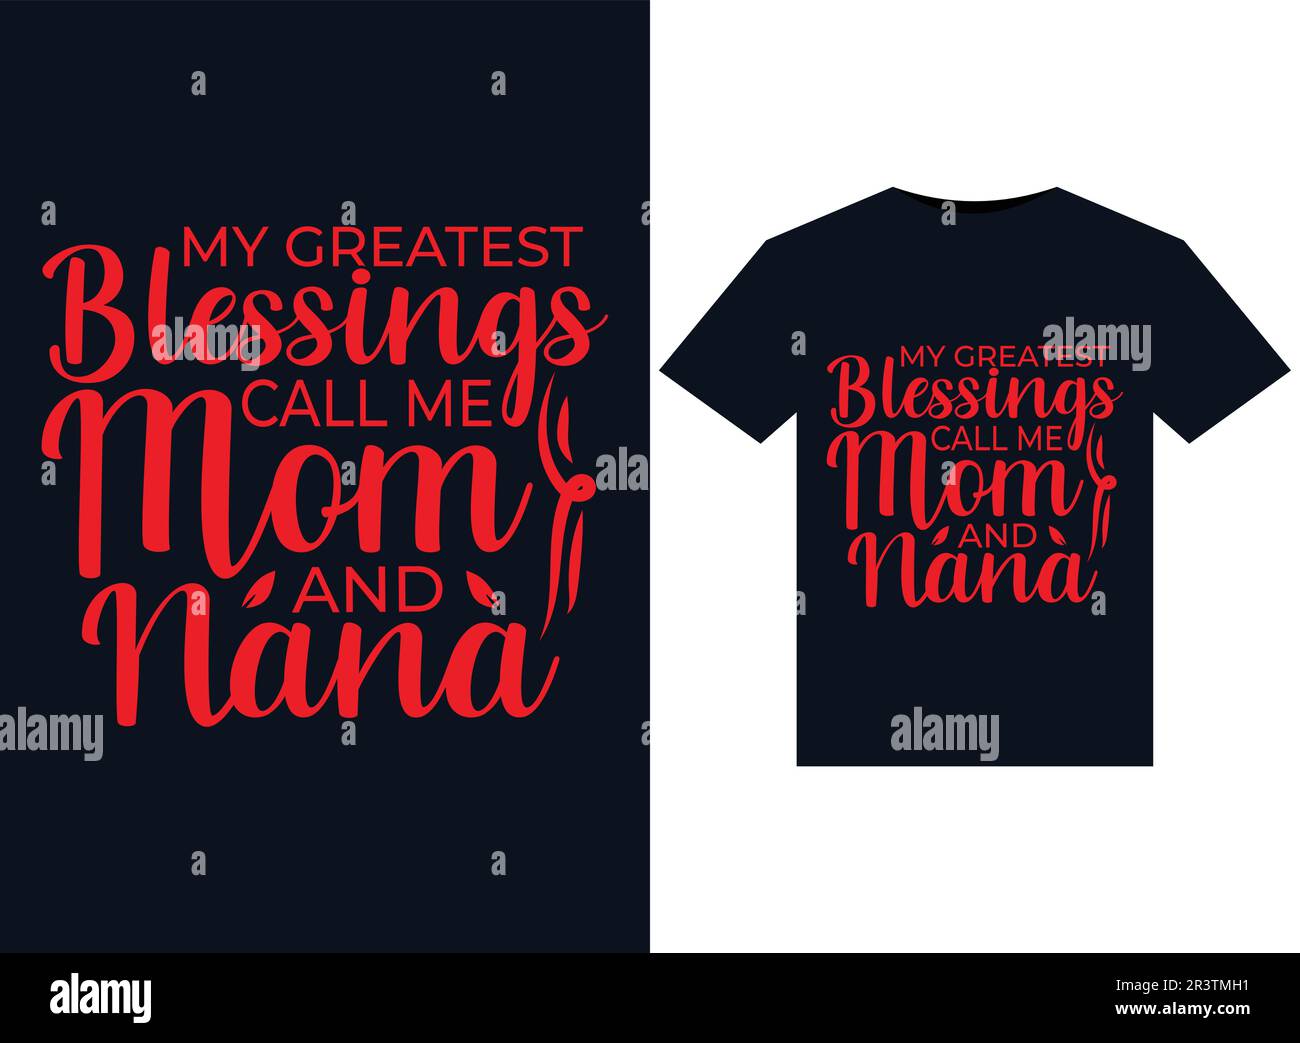 My Gratest blessing call me mom and nana illustrations for print-ready T-Shirts design Stock Vector